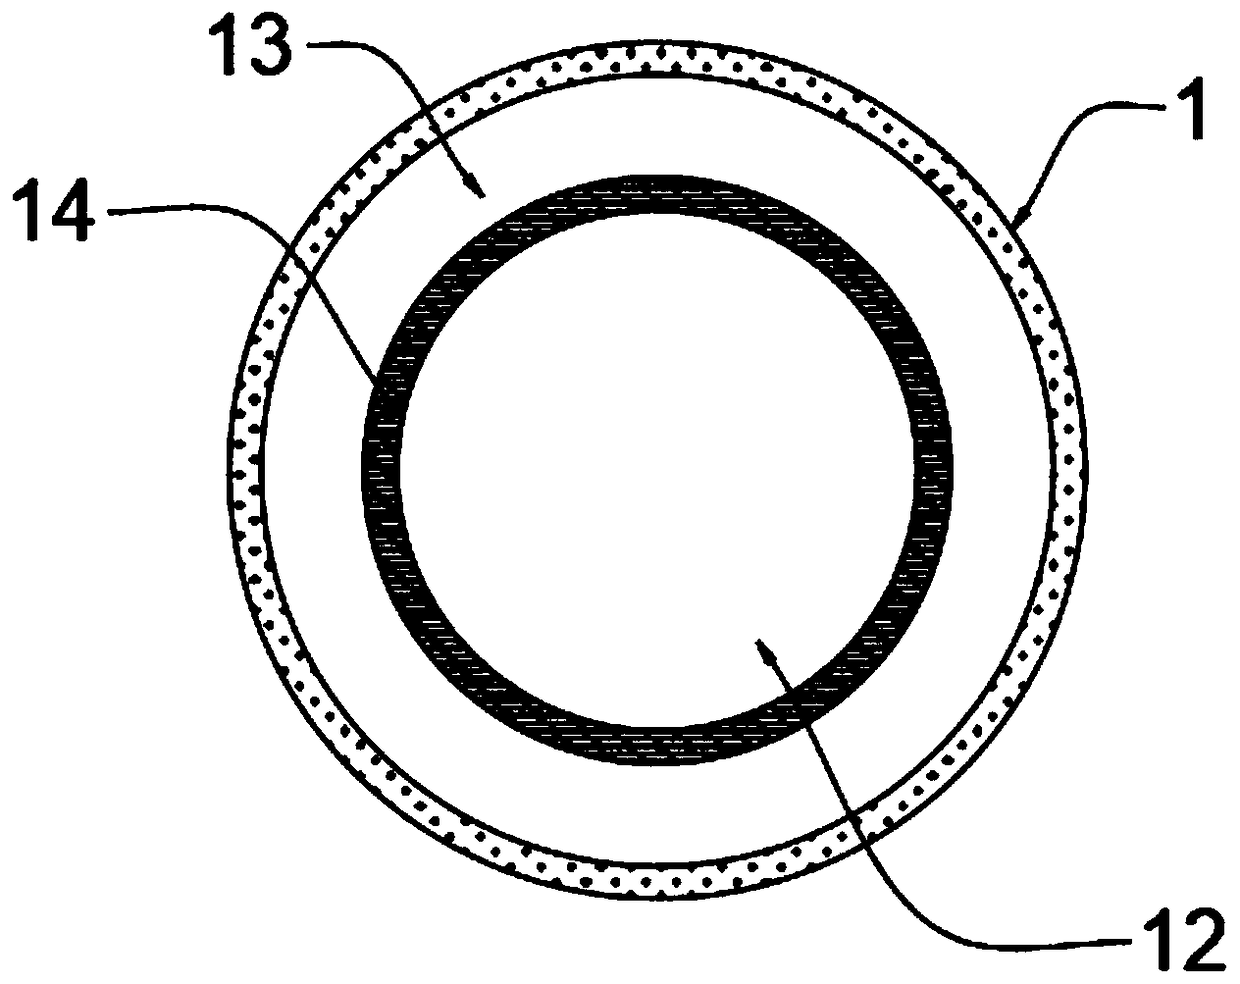 Retractable and expandable catheter